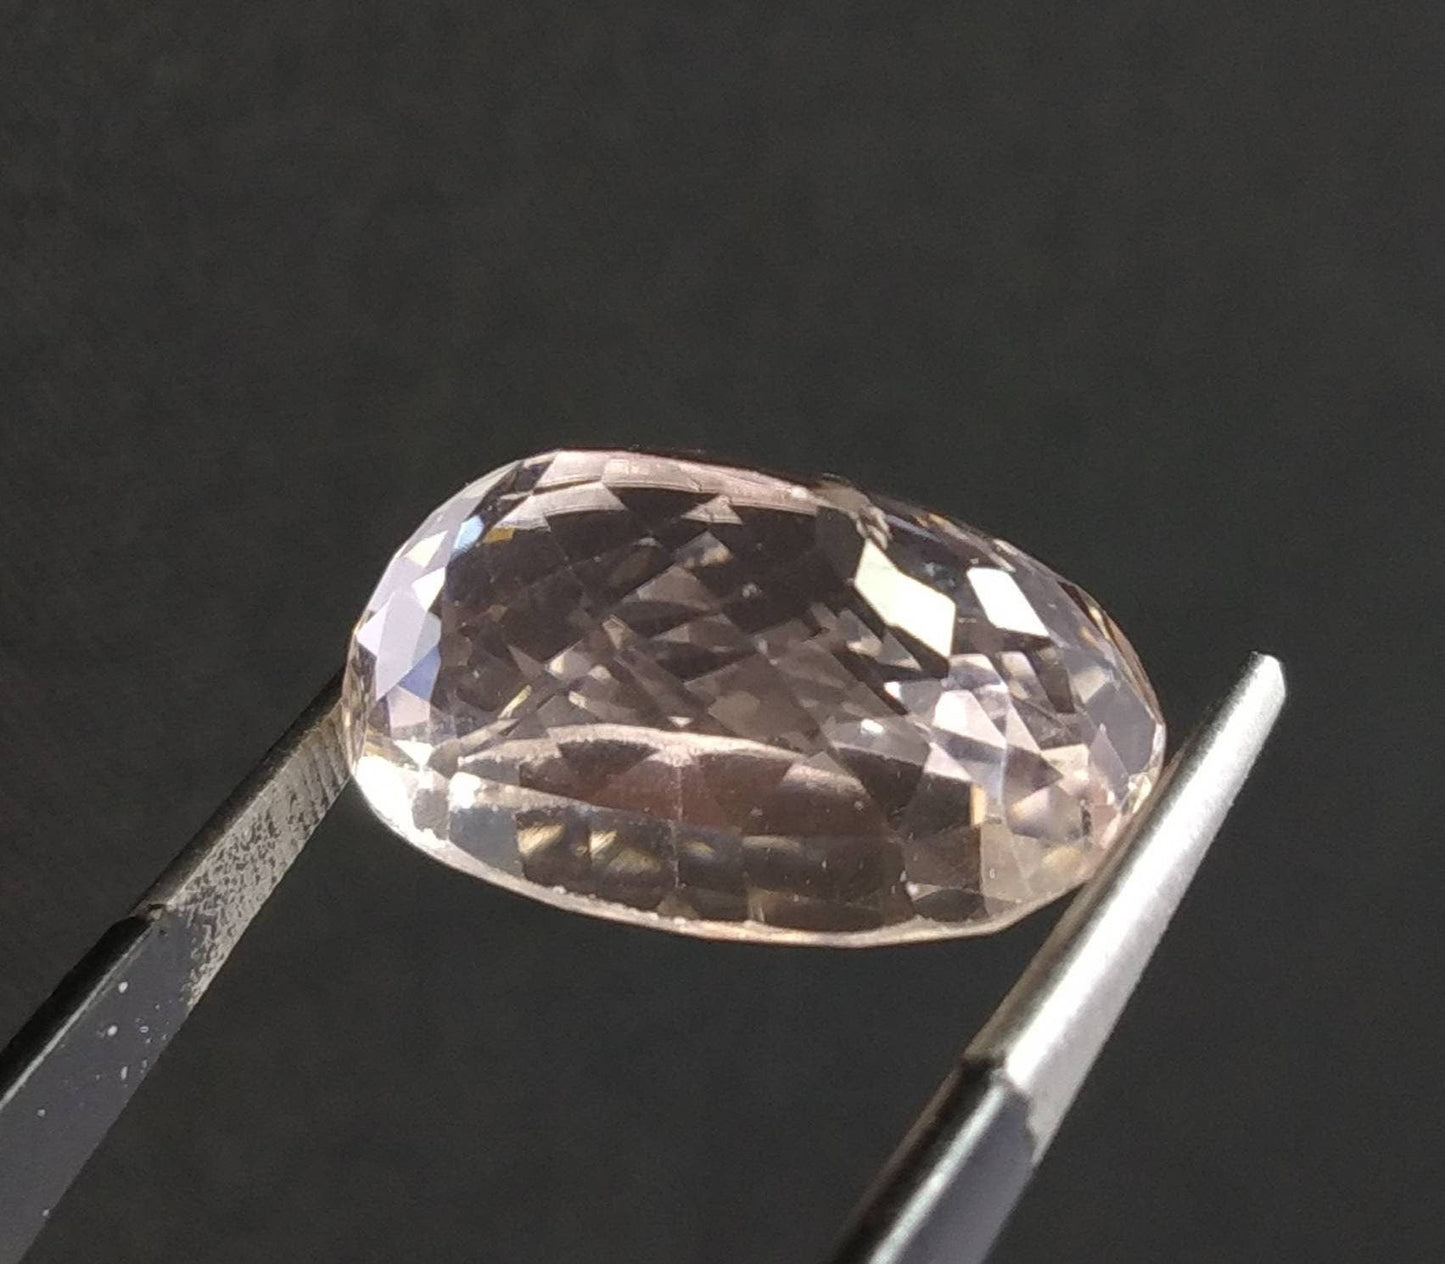 ARSAA GEMS AND MINERALSNatural top quality beautiful 17.5 caratVV clarity faceted oval shape kunzite gem - Premium  from ARSAA GEMS AND MINERALS - Just $35.00! Shop now at ARSAA GEMS AND MINERALS